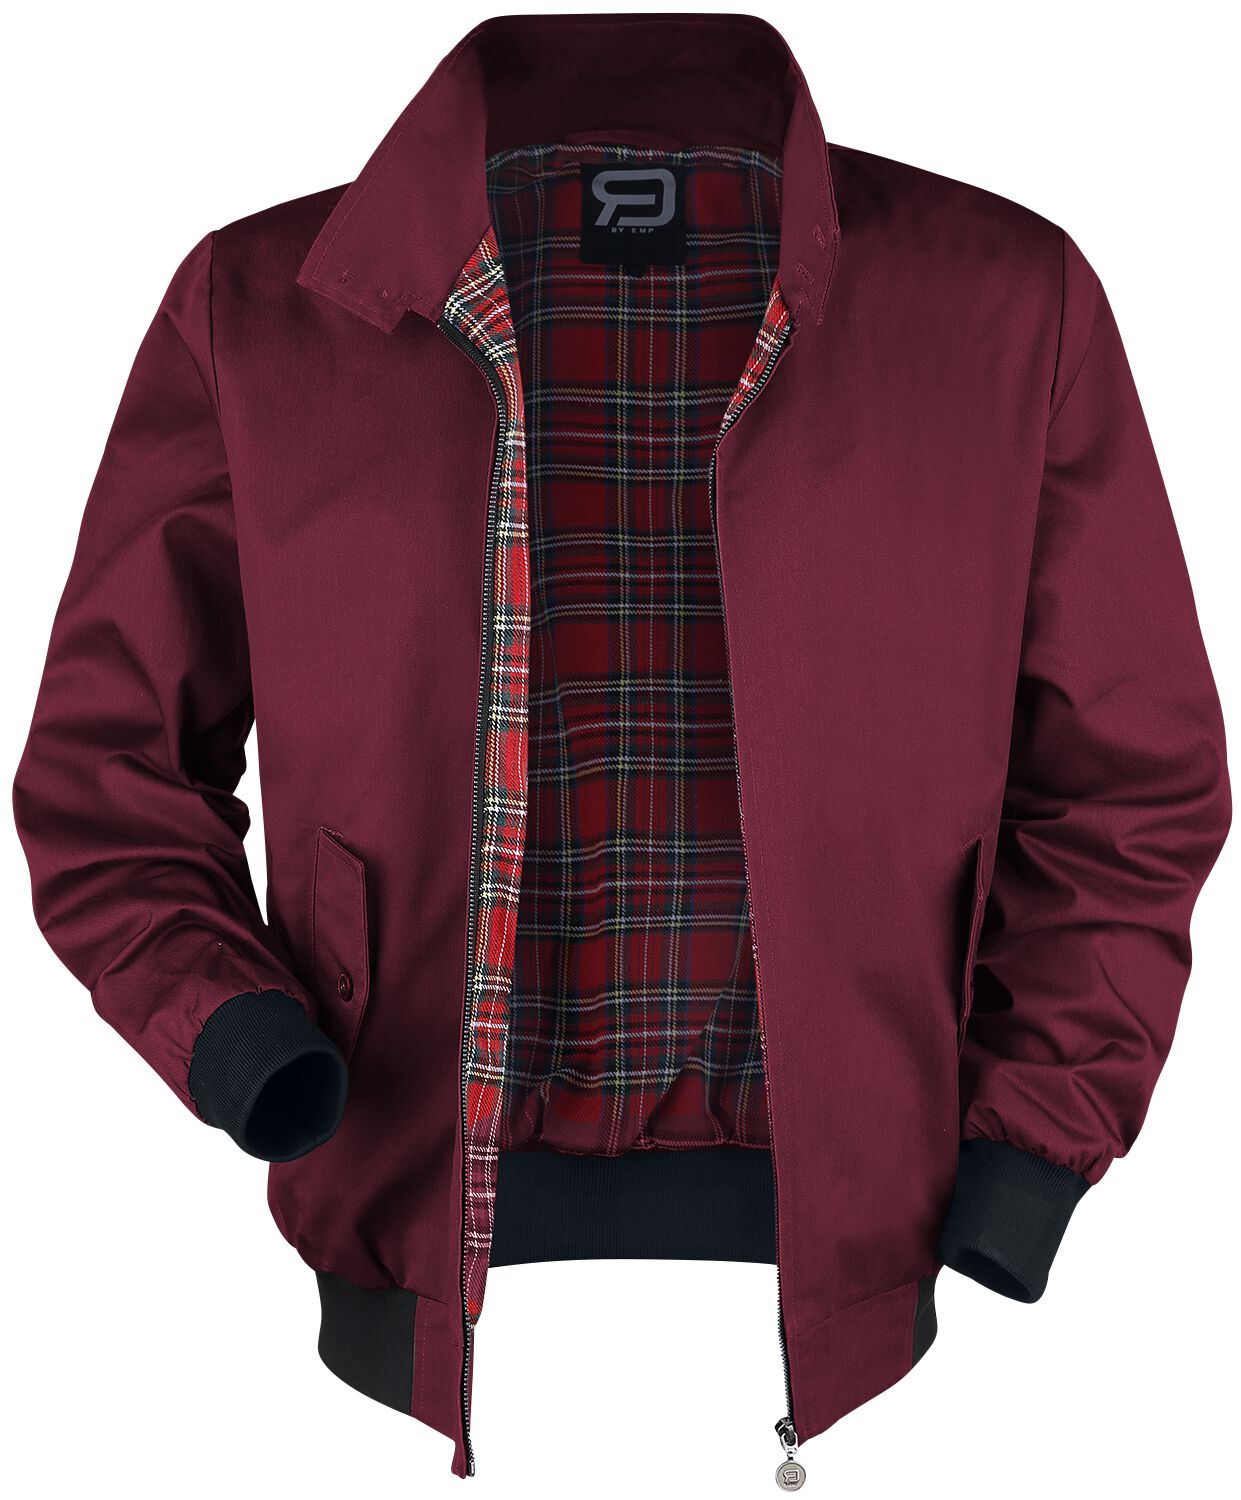 RED by EMP Larger Than Life Bomber Jacket Übergangsjacke bordeaux in S von RED by EMP